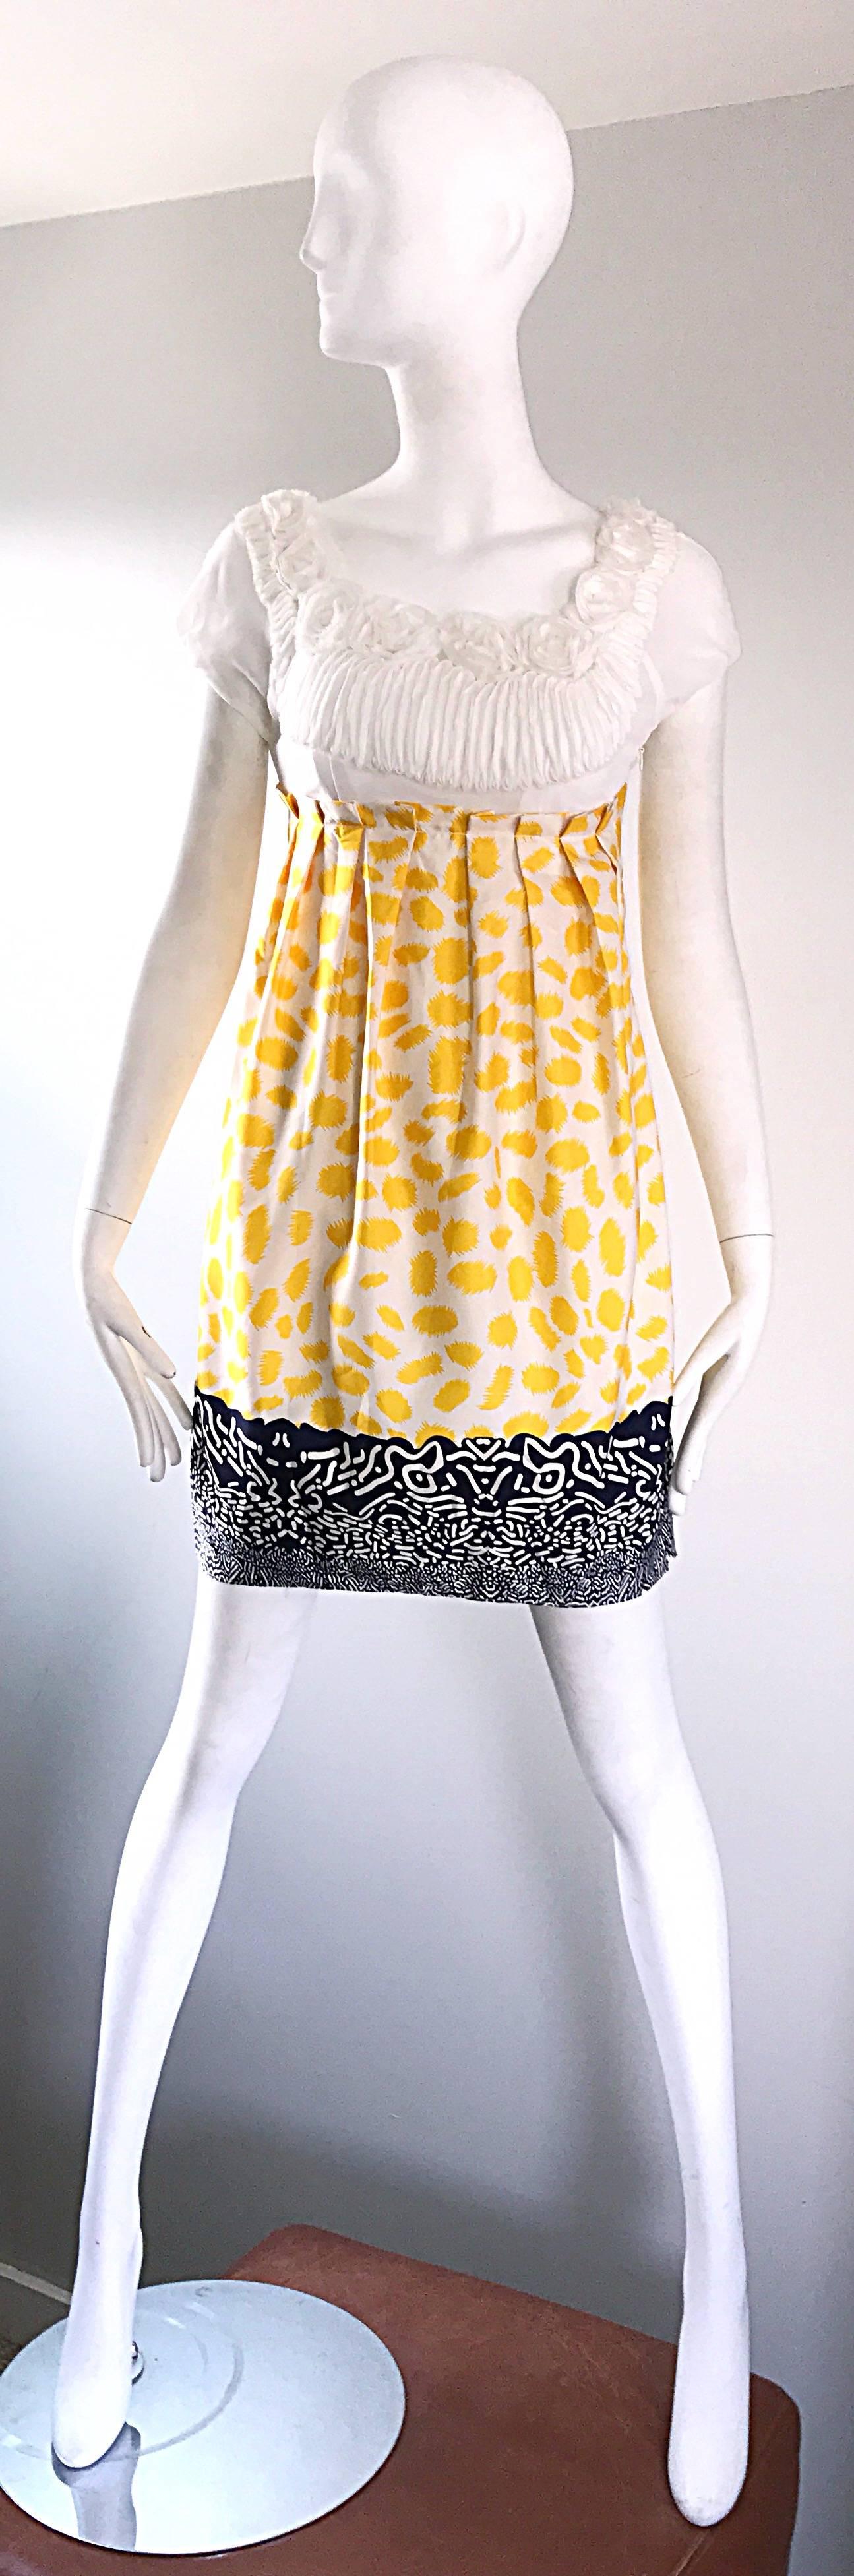 New MARC JACOBS Collection empire waist silk babydoll puff sleeve dress! Features vibrant yellow, navy blue and white abstract print. Pleated ruffle detail at waist. Angelic white chiffon bodice, with flower appliqués along the neck. Hidden zipper